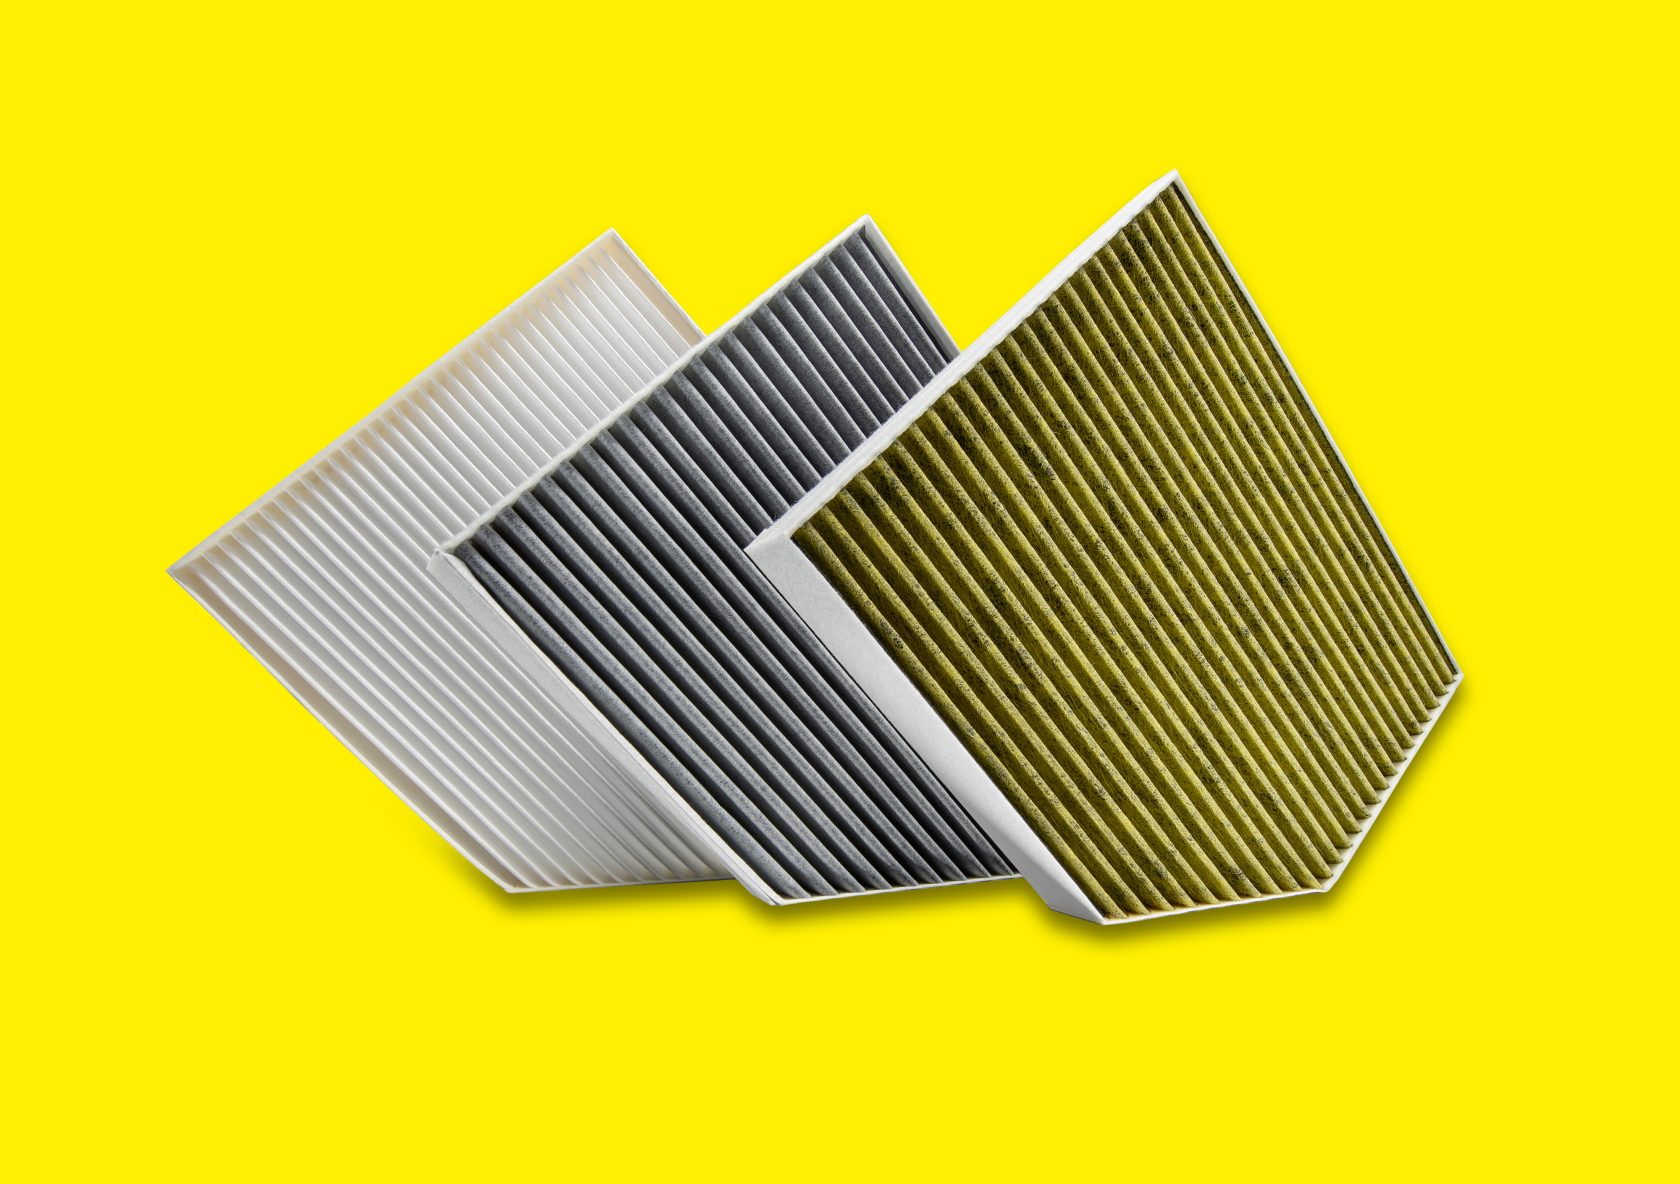 Cabin air filters for pollen